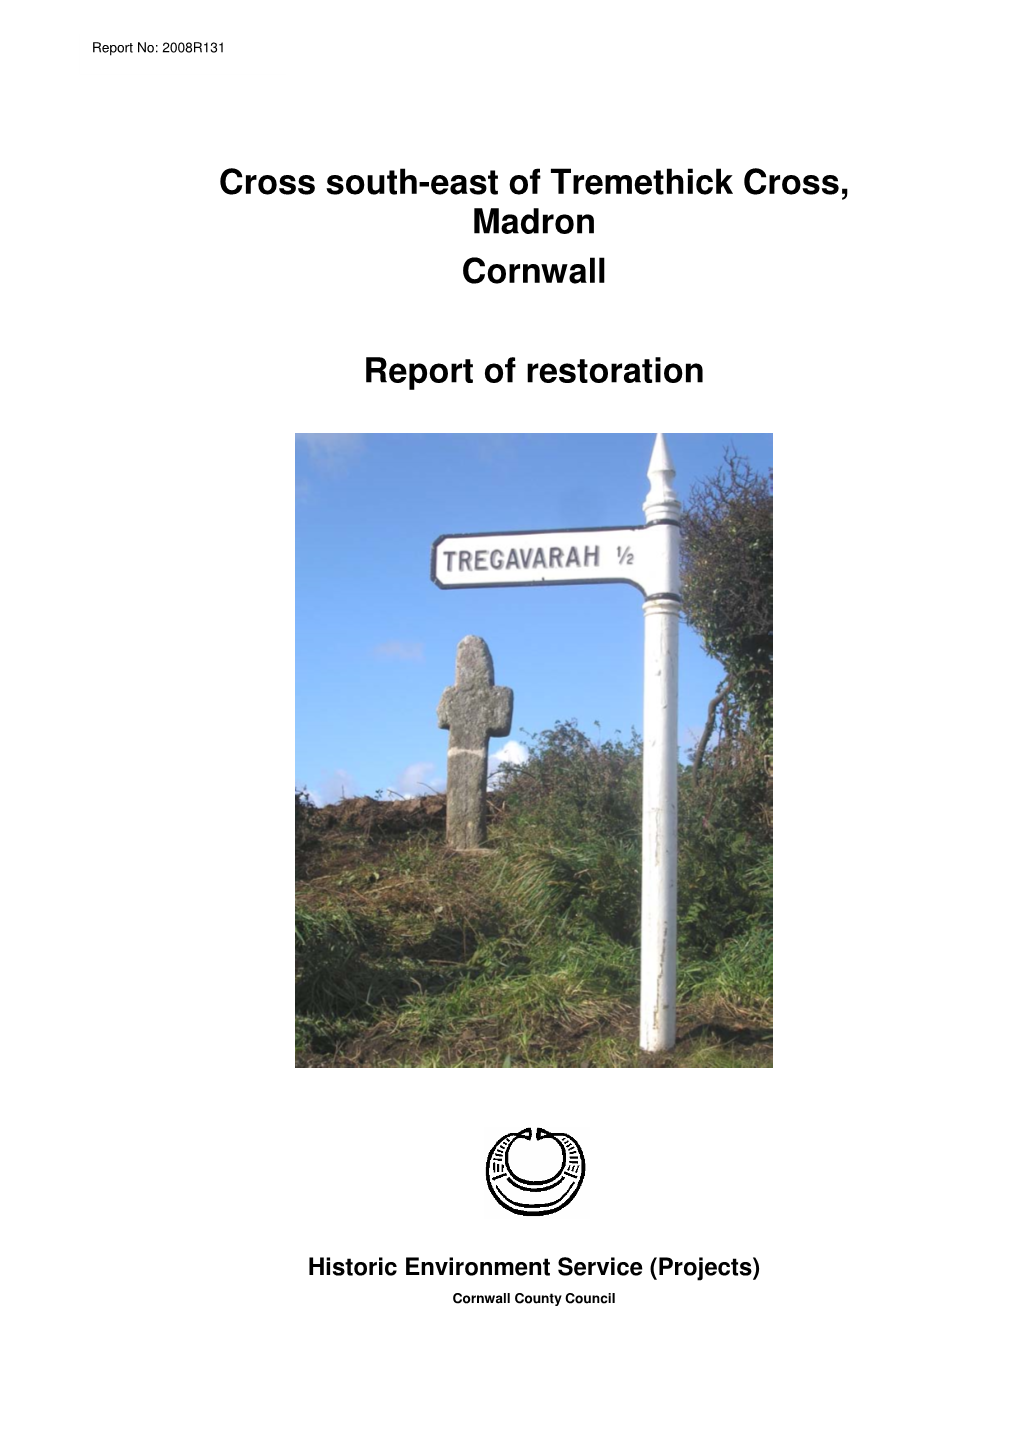 Cross South-East of Tremethick Cross, Madron Cornwall Report Of